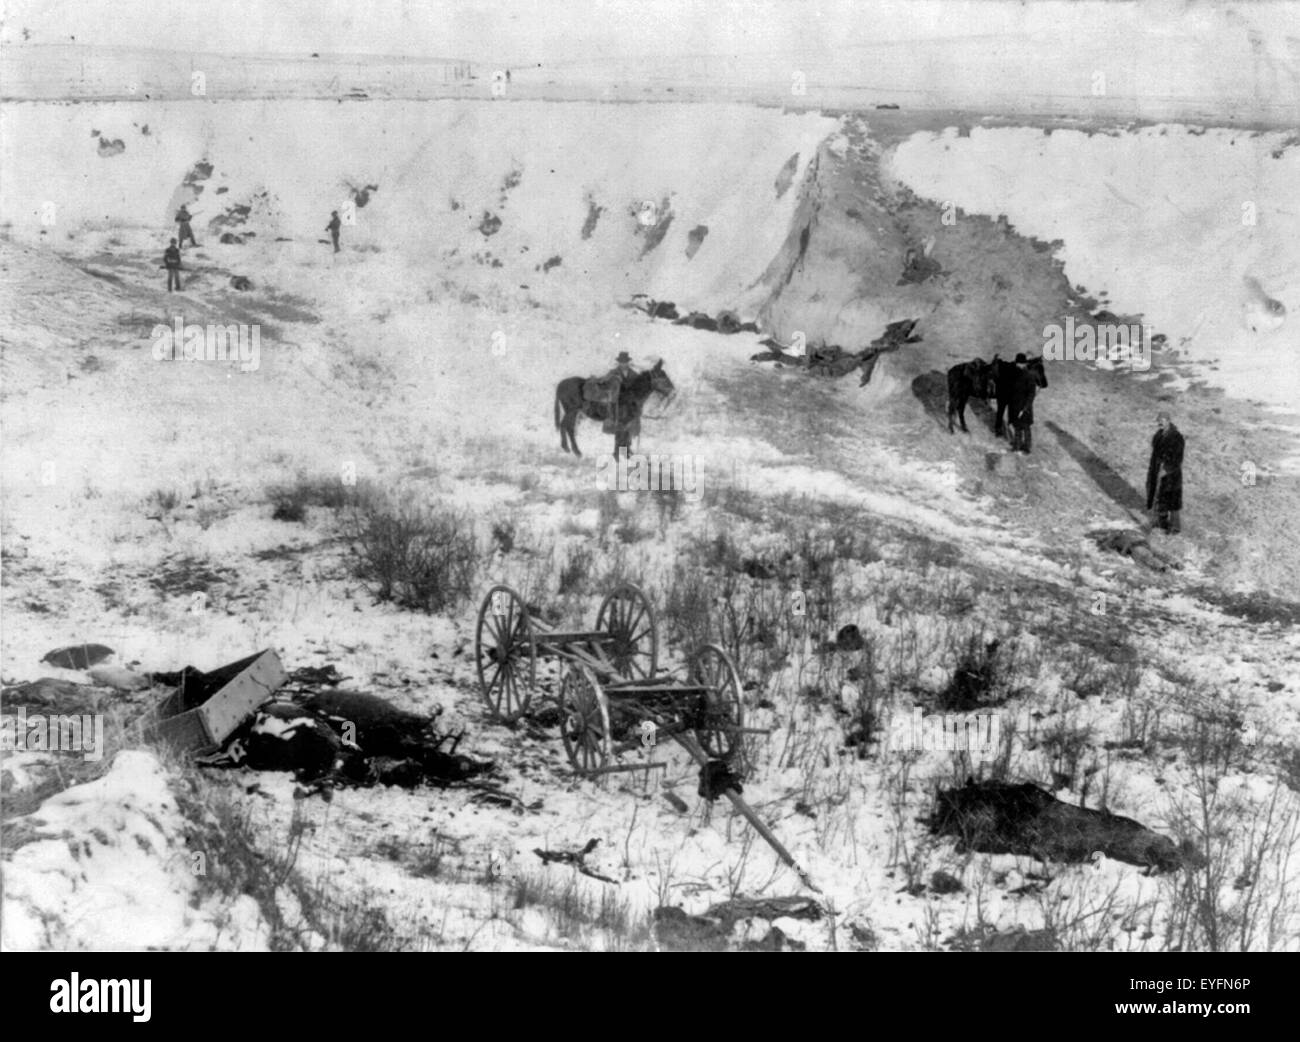 Birds eye view of canyon at Wounded Knee, South Dakota - Dead horses and Indians, 1891 Stock Photo